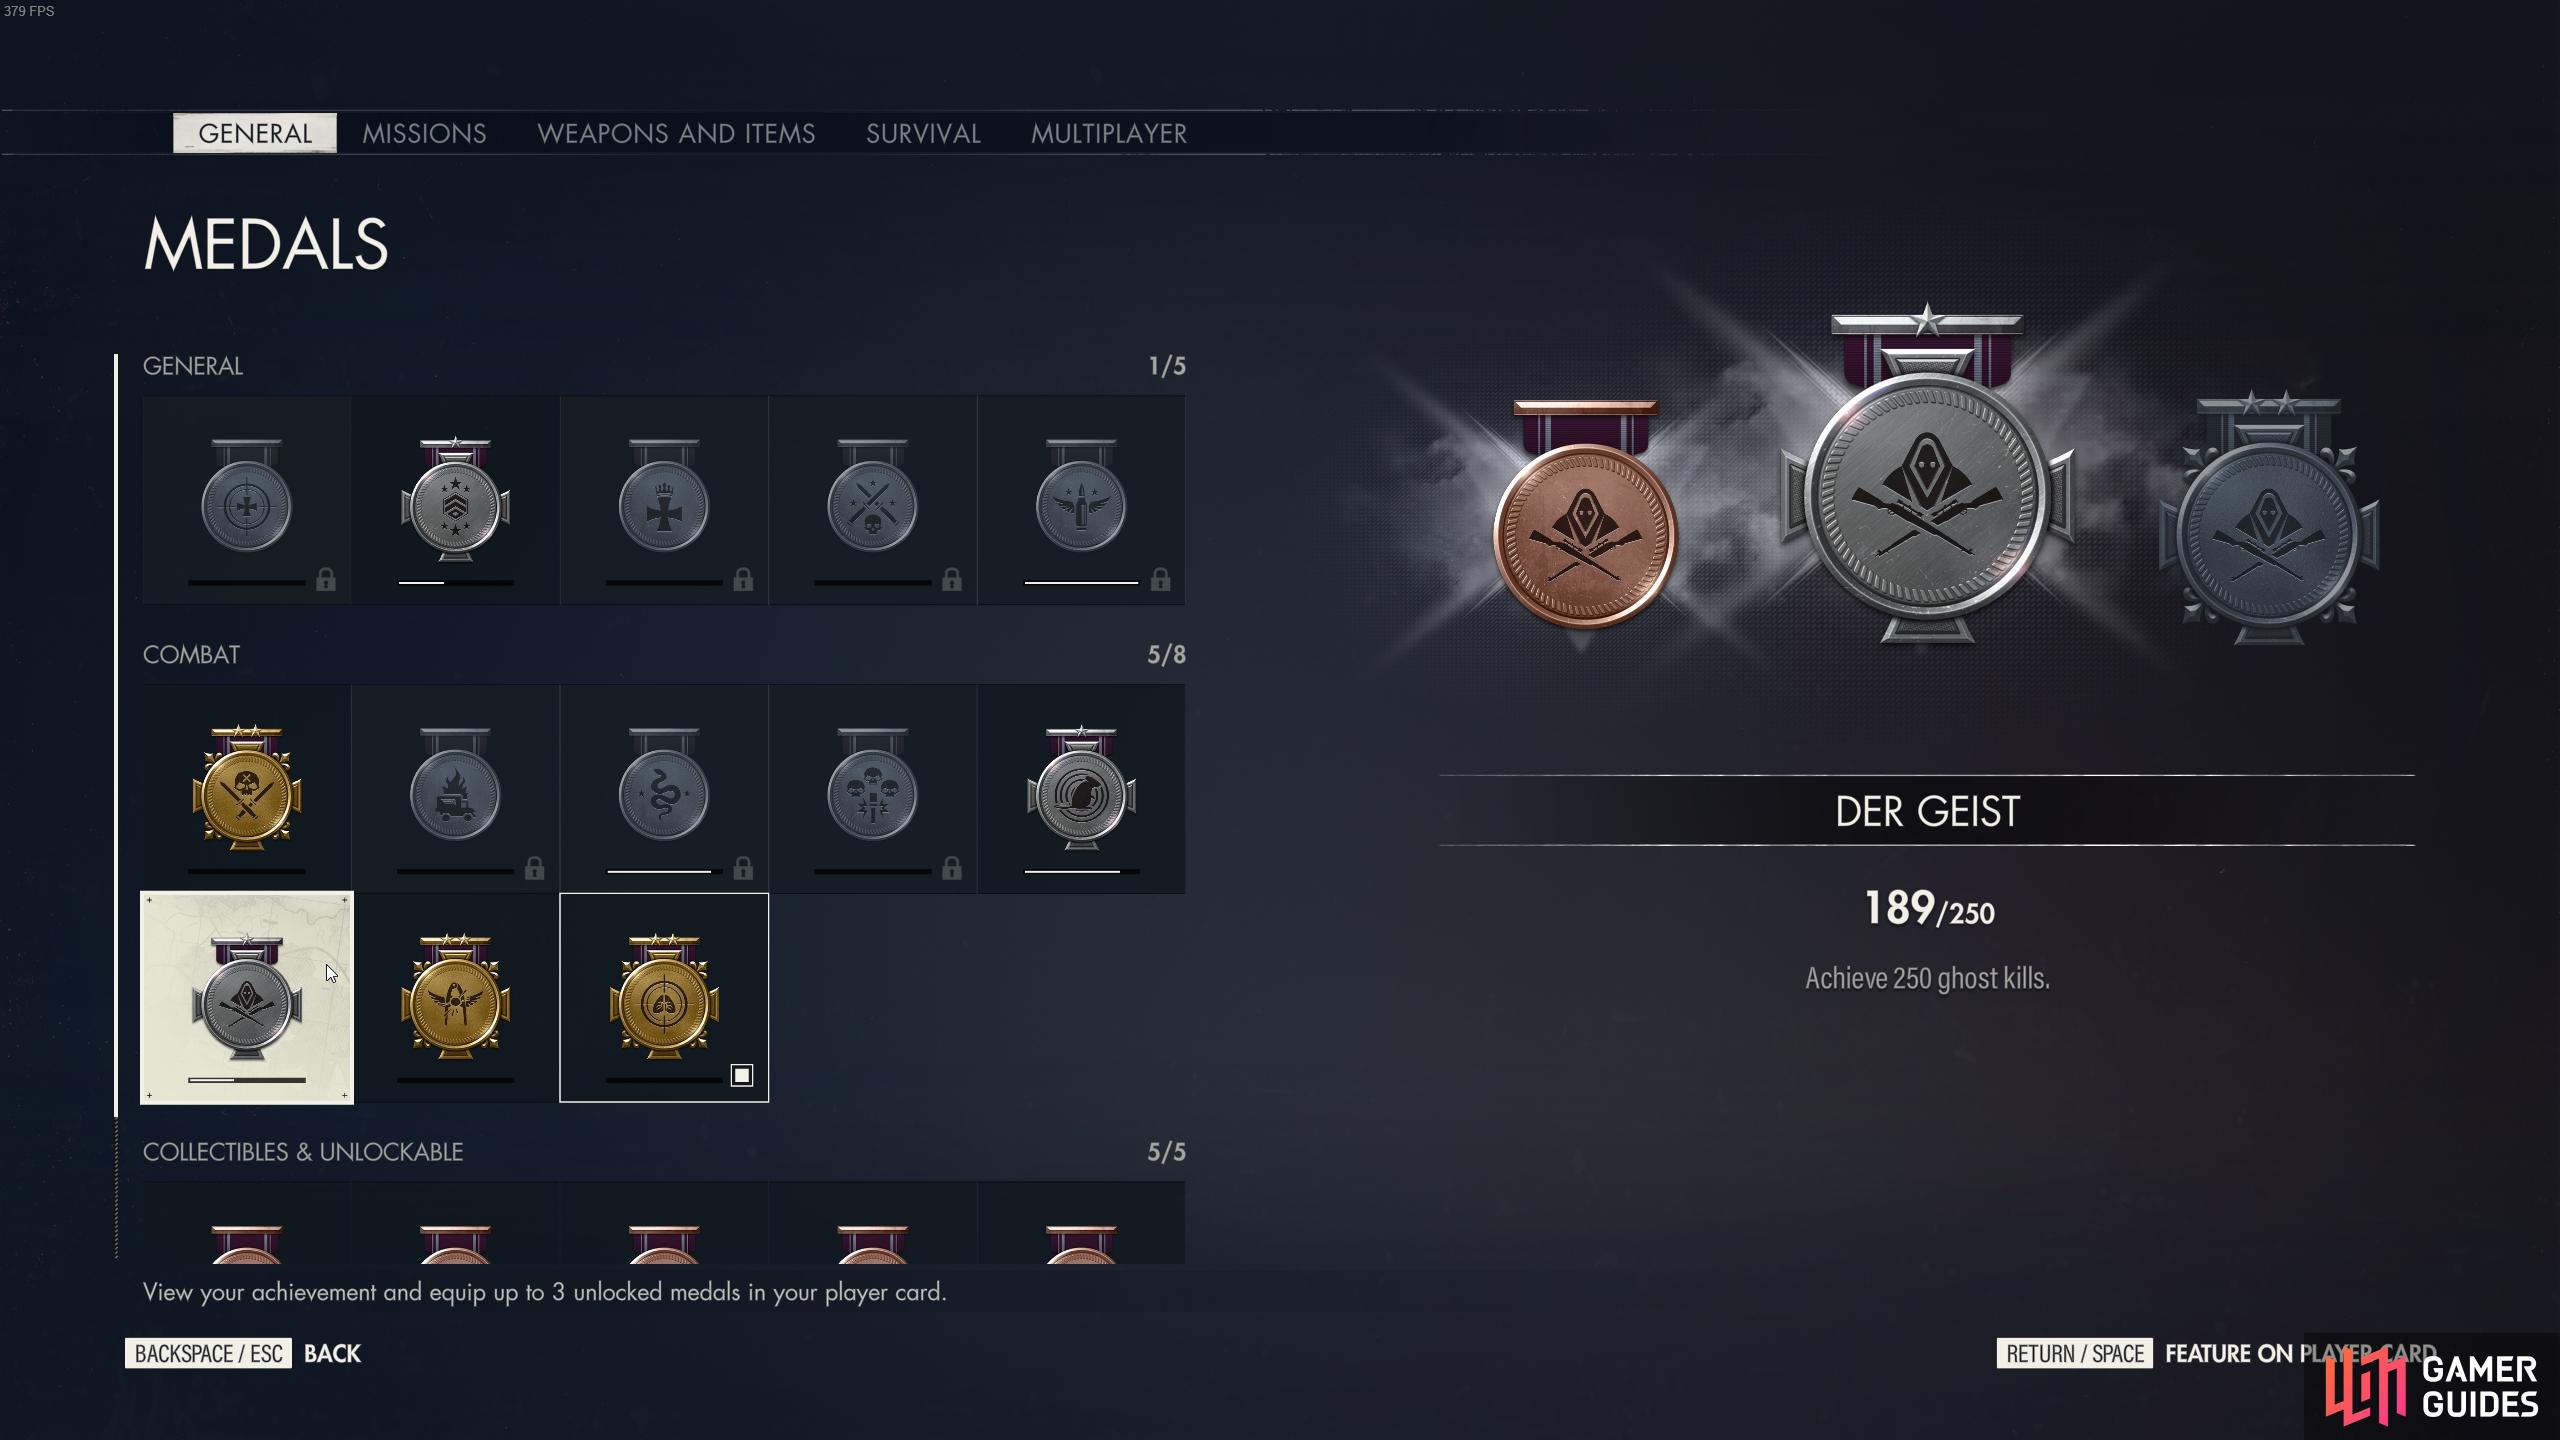 You can hover over a specific medal to check the progress towards its unlock requirements for Bronze, Silver, or Gold.